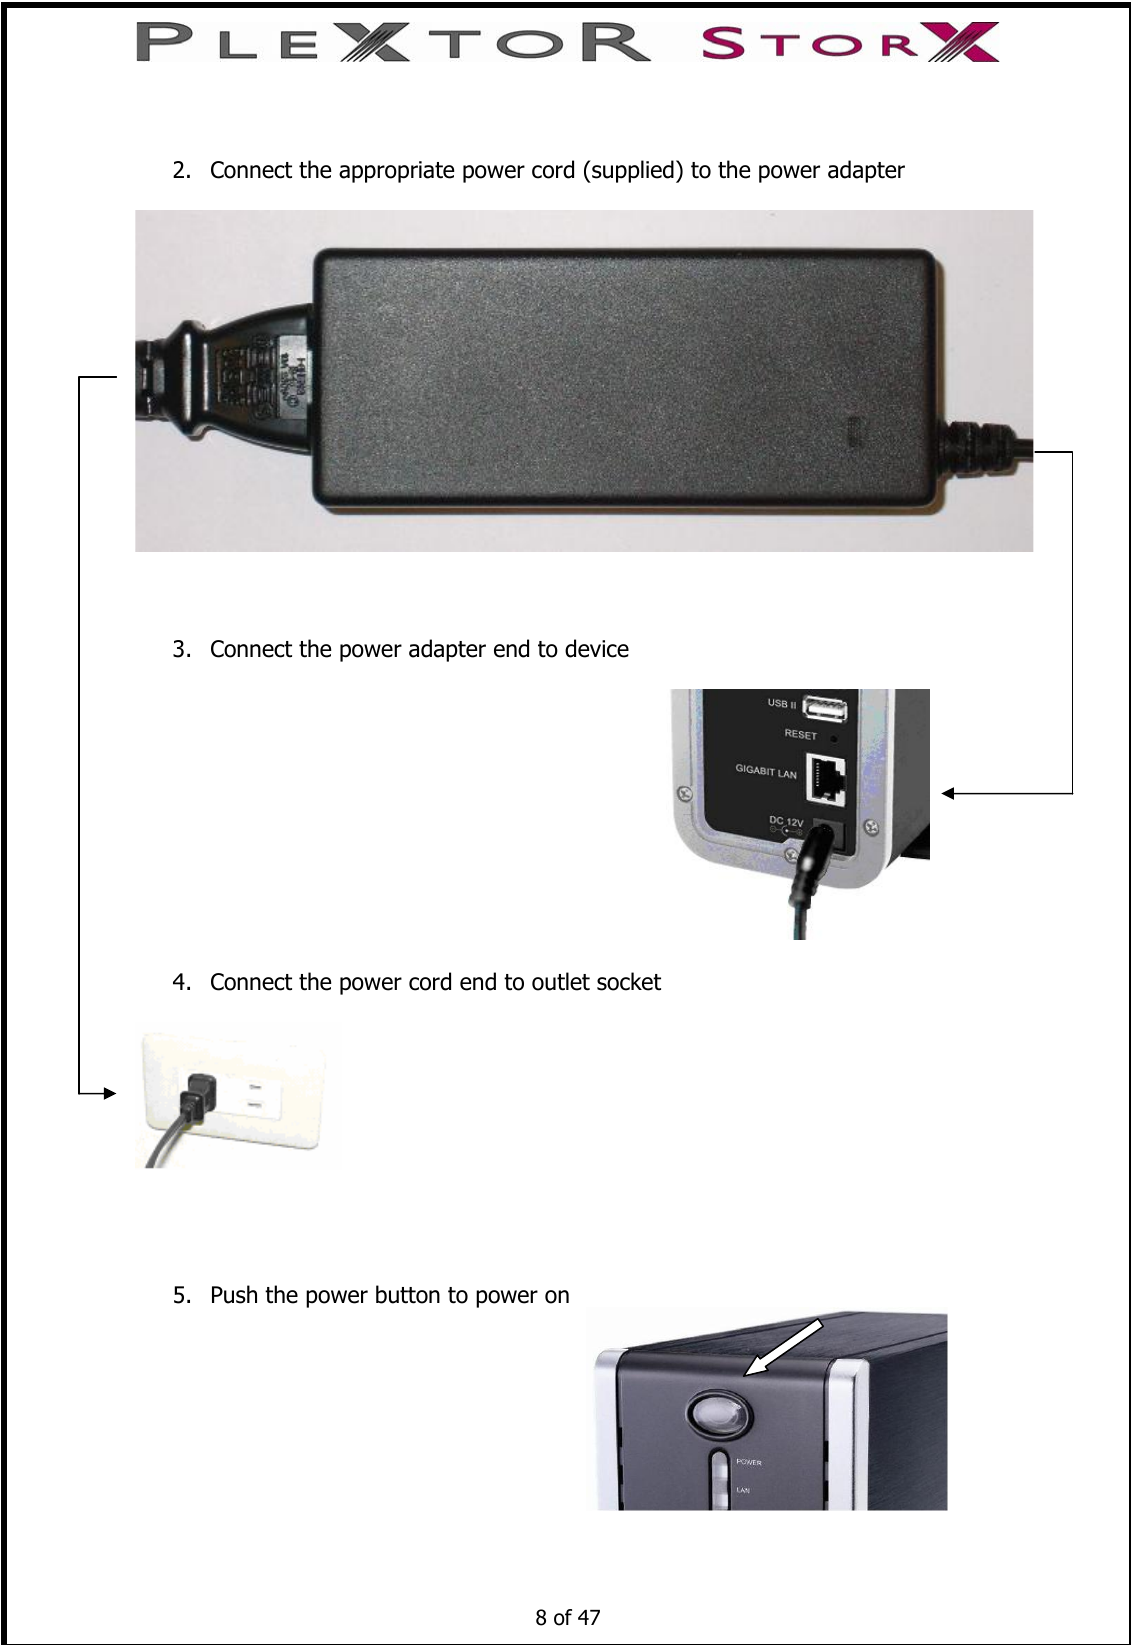    2. Connect the appropriate power cord (supplied) to the power adapter      3. Connect the power adapter end to device                                                                                                        4. Connect the power cord end to outlet socket       5. Push the power button to power on                                                                     8 of 47   